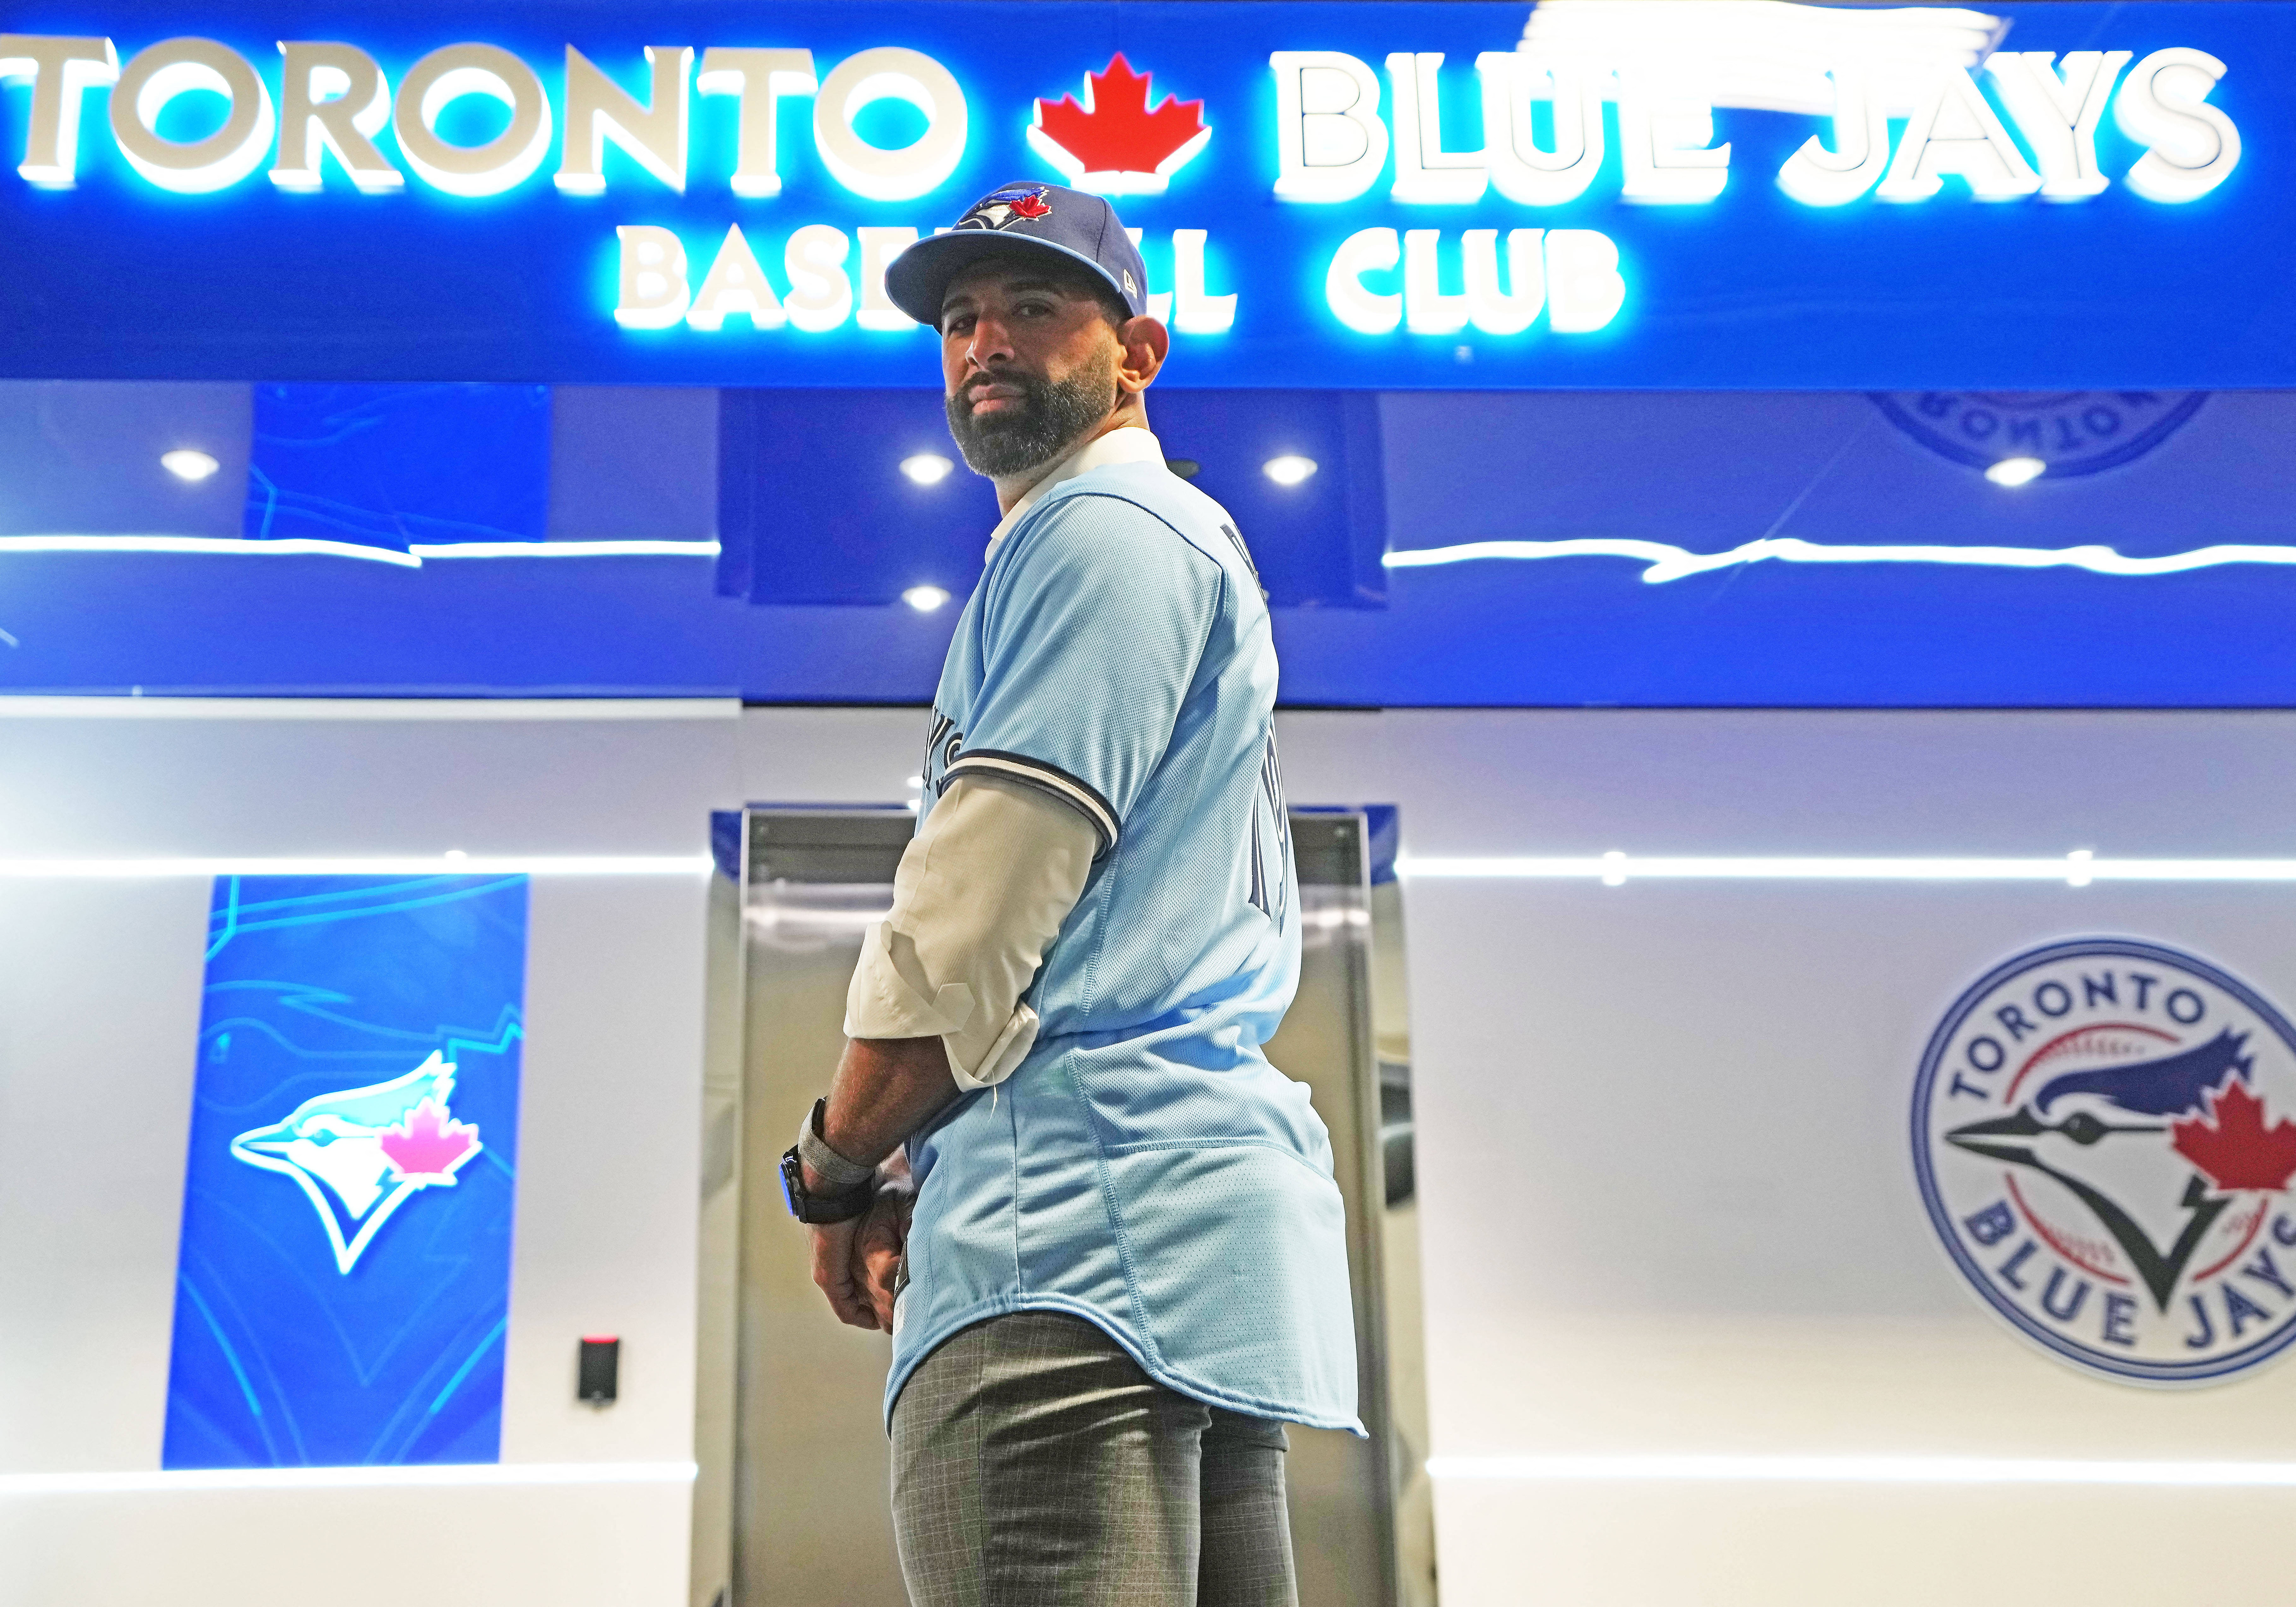 Blue Jays to add José Bautista to Level of Excellence ahead of Aug